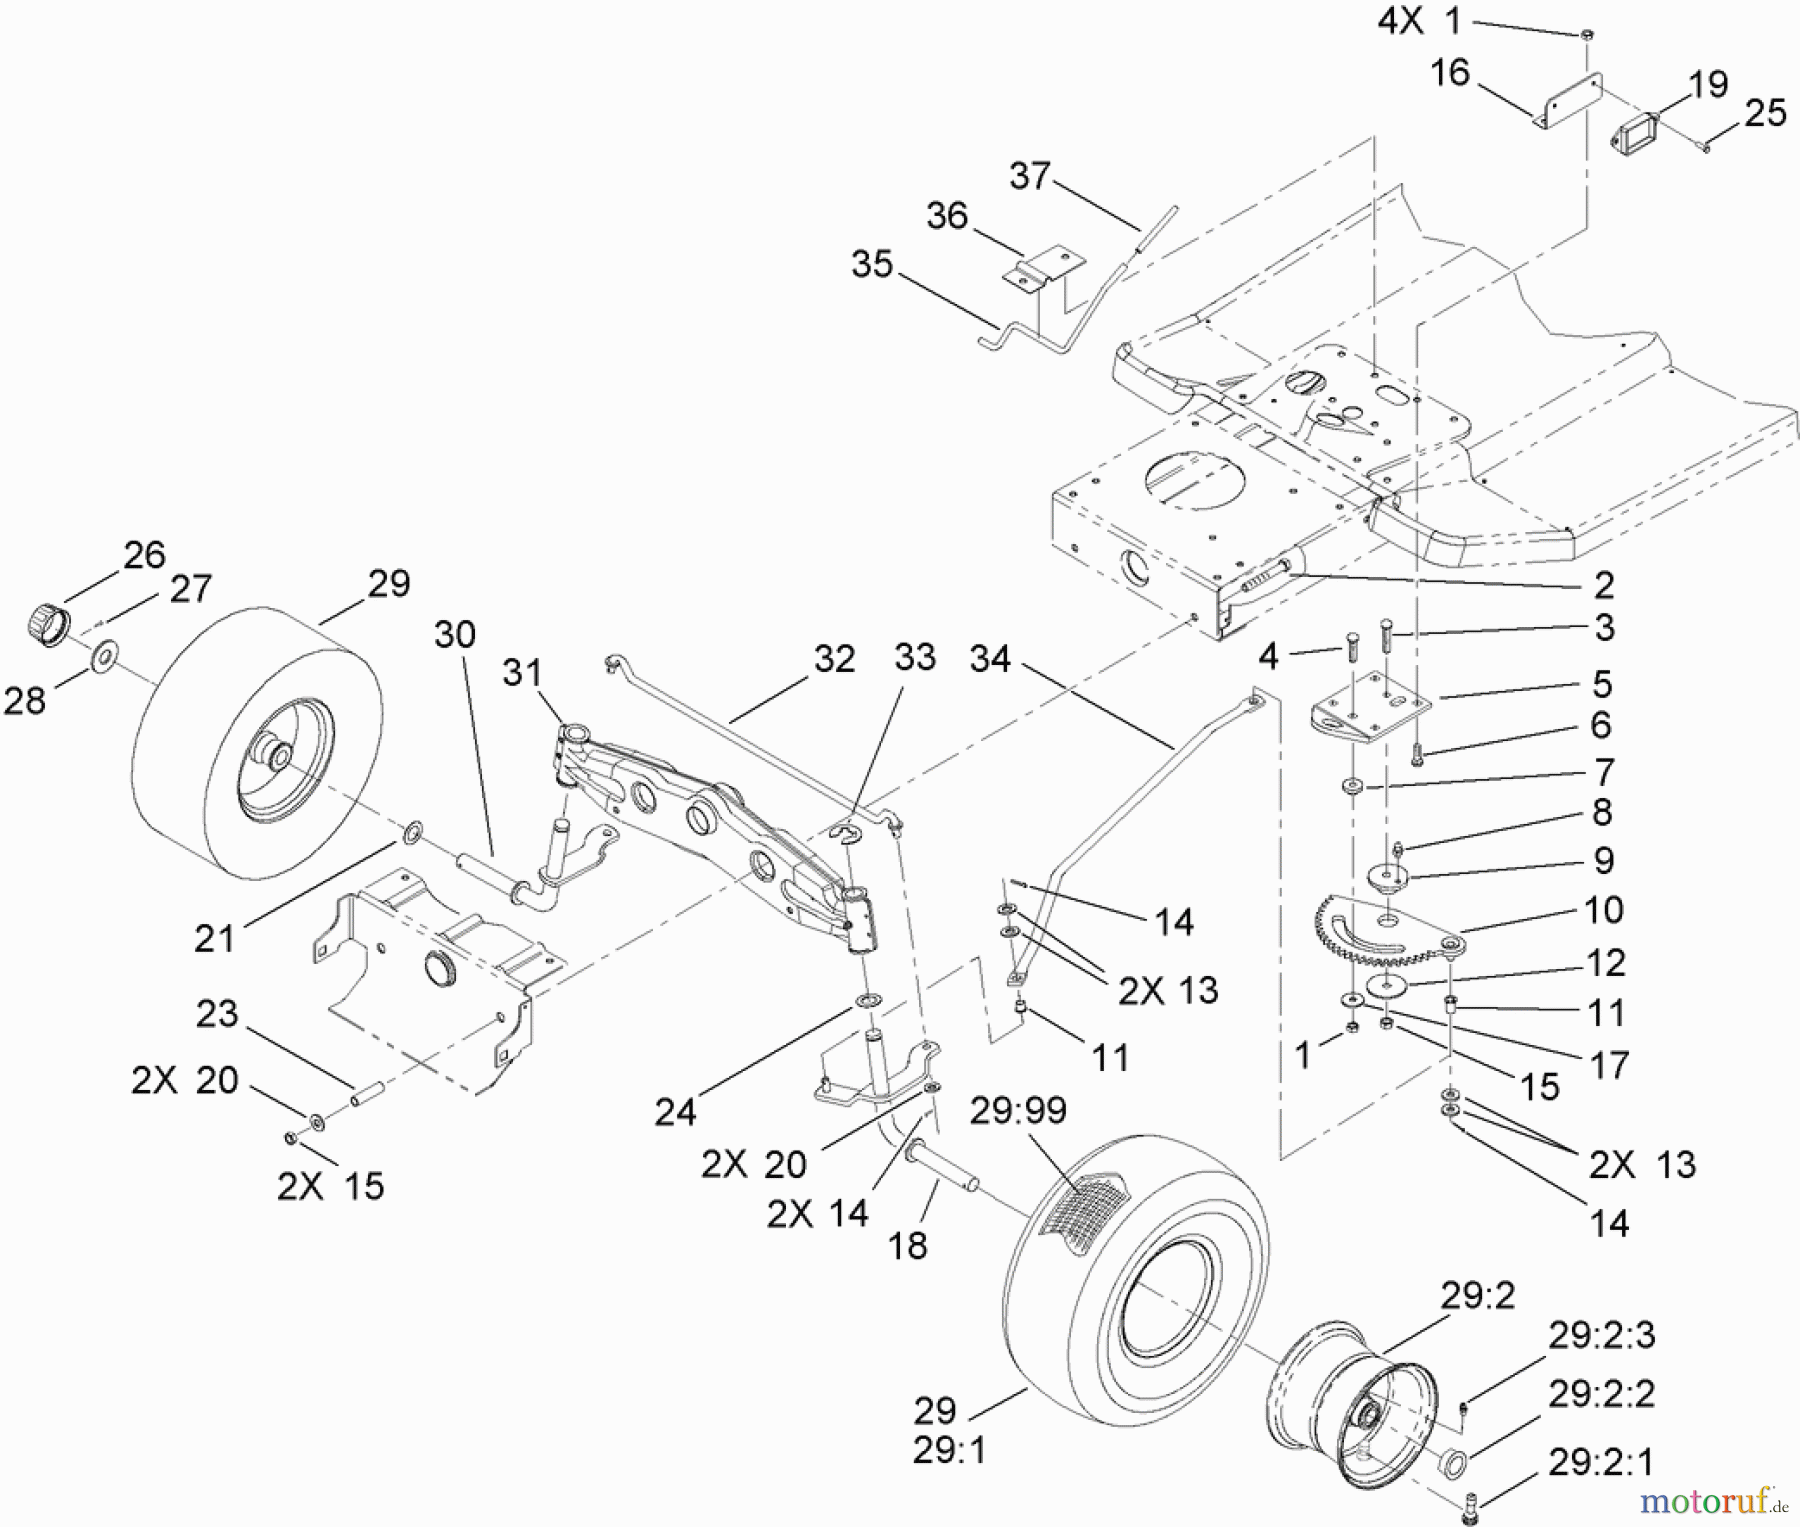  Toro Neu Mowers, Lawn & Garden Tractor Seite 1 71257 (XL 320) - Toro XL 320 Lawn Tractor, 2010 (310000001-310999999) STEERING COMPONENT ASSEMBLY